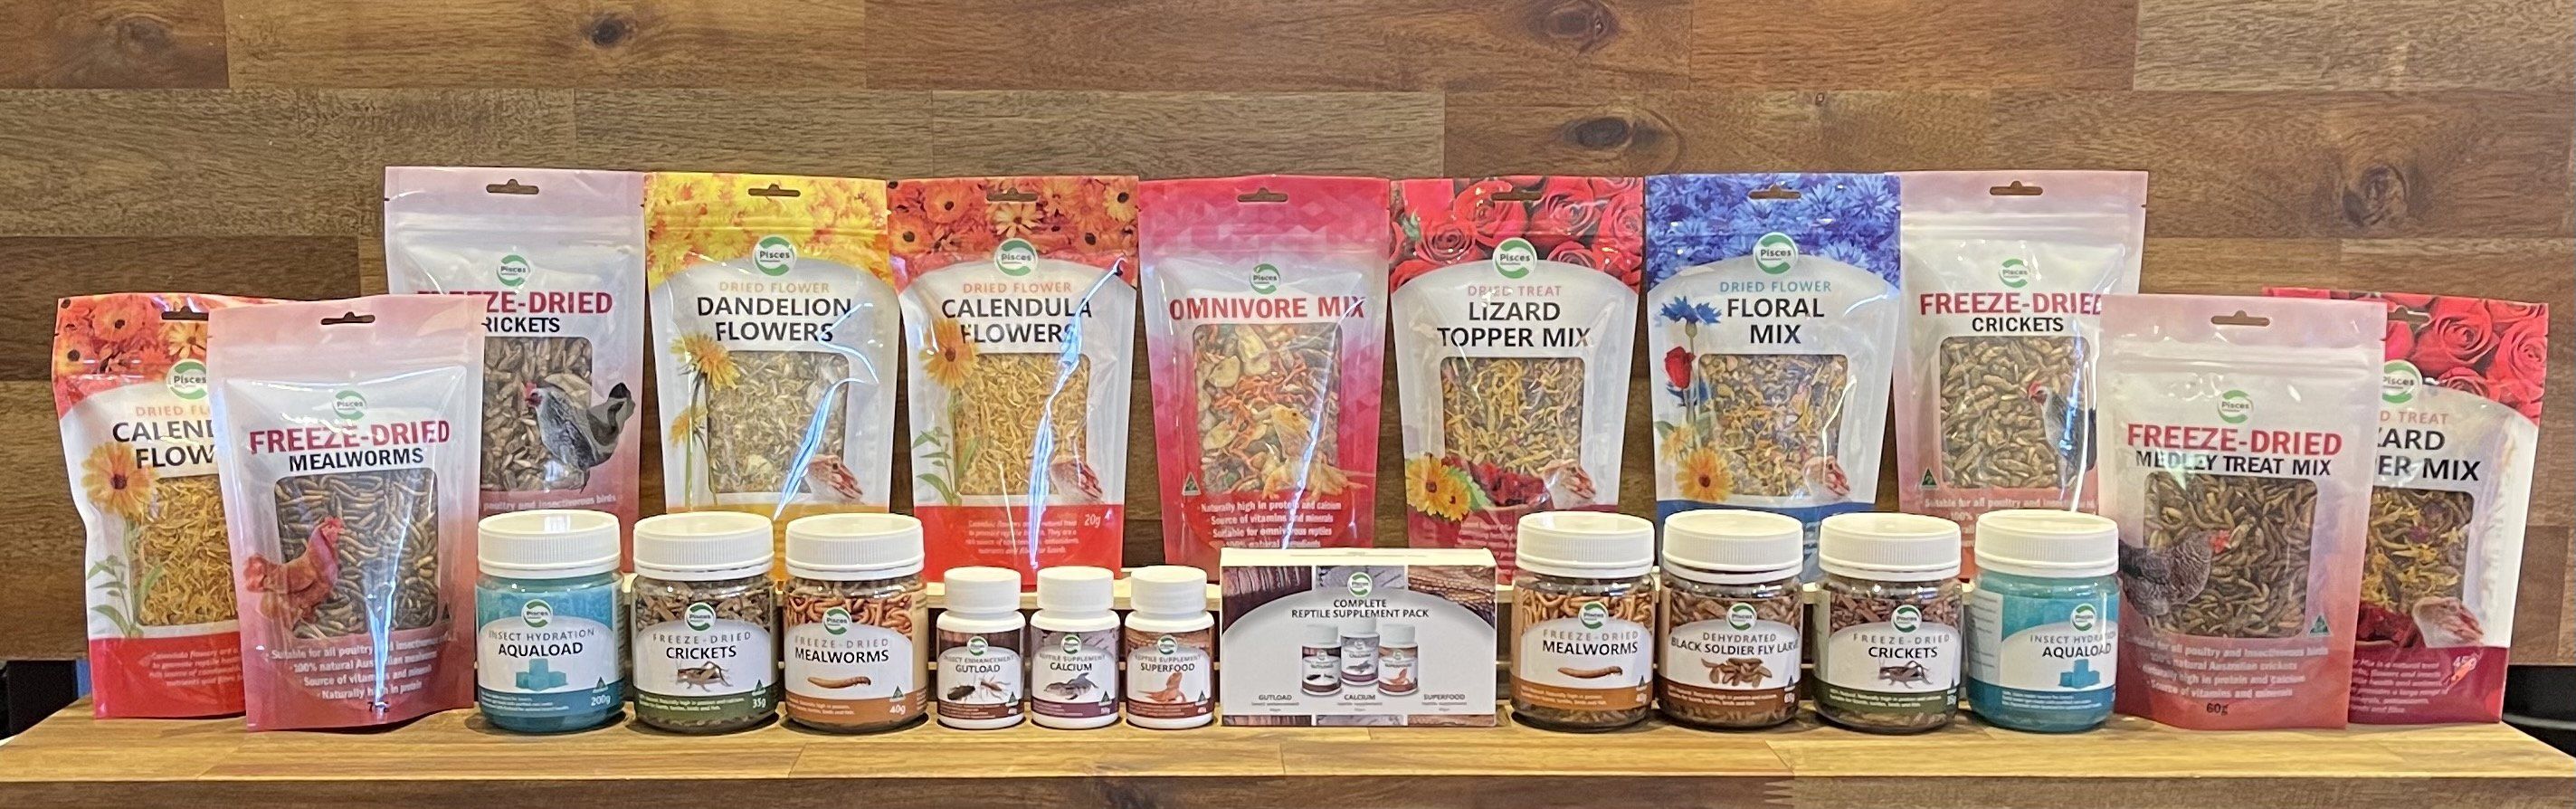 Dried Food, Floral Blends & Supplements